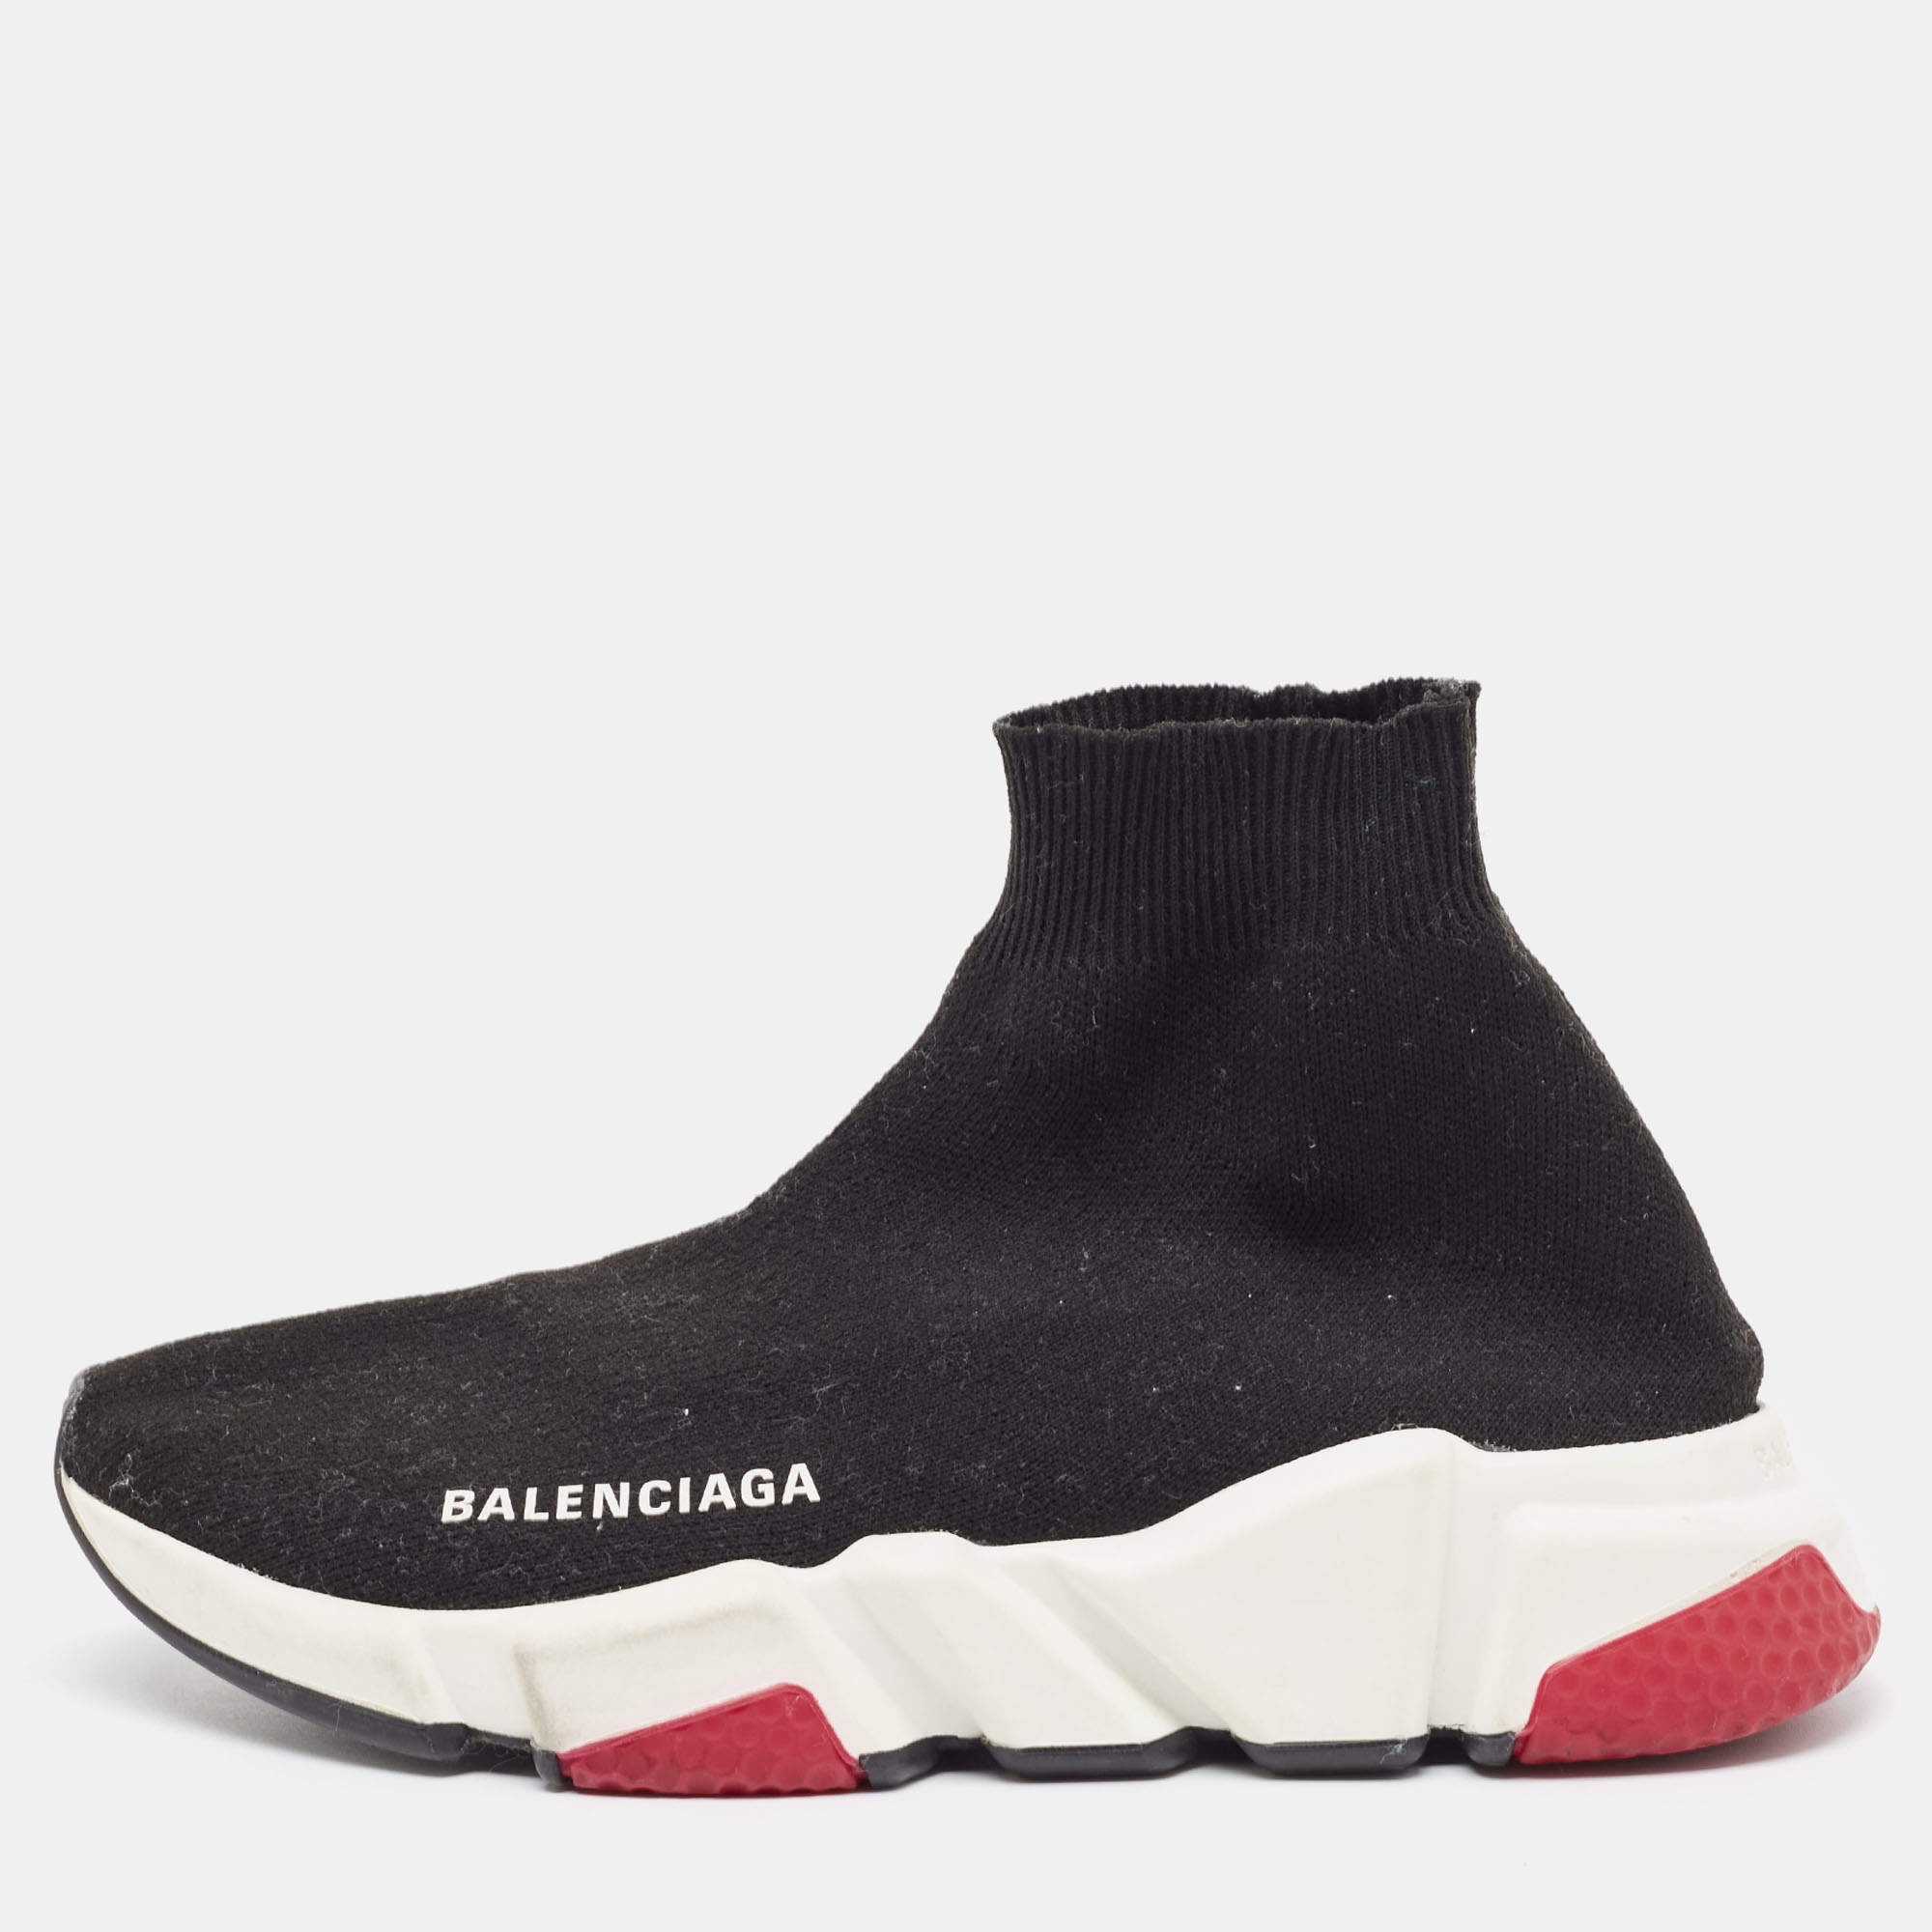 Balenciaga Black Knit Fabric Speed Trainer Sneakers Size 35